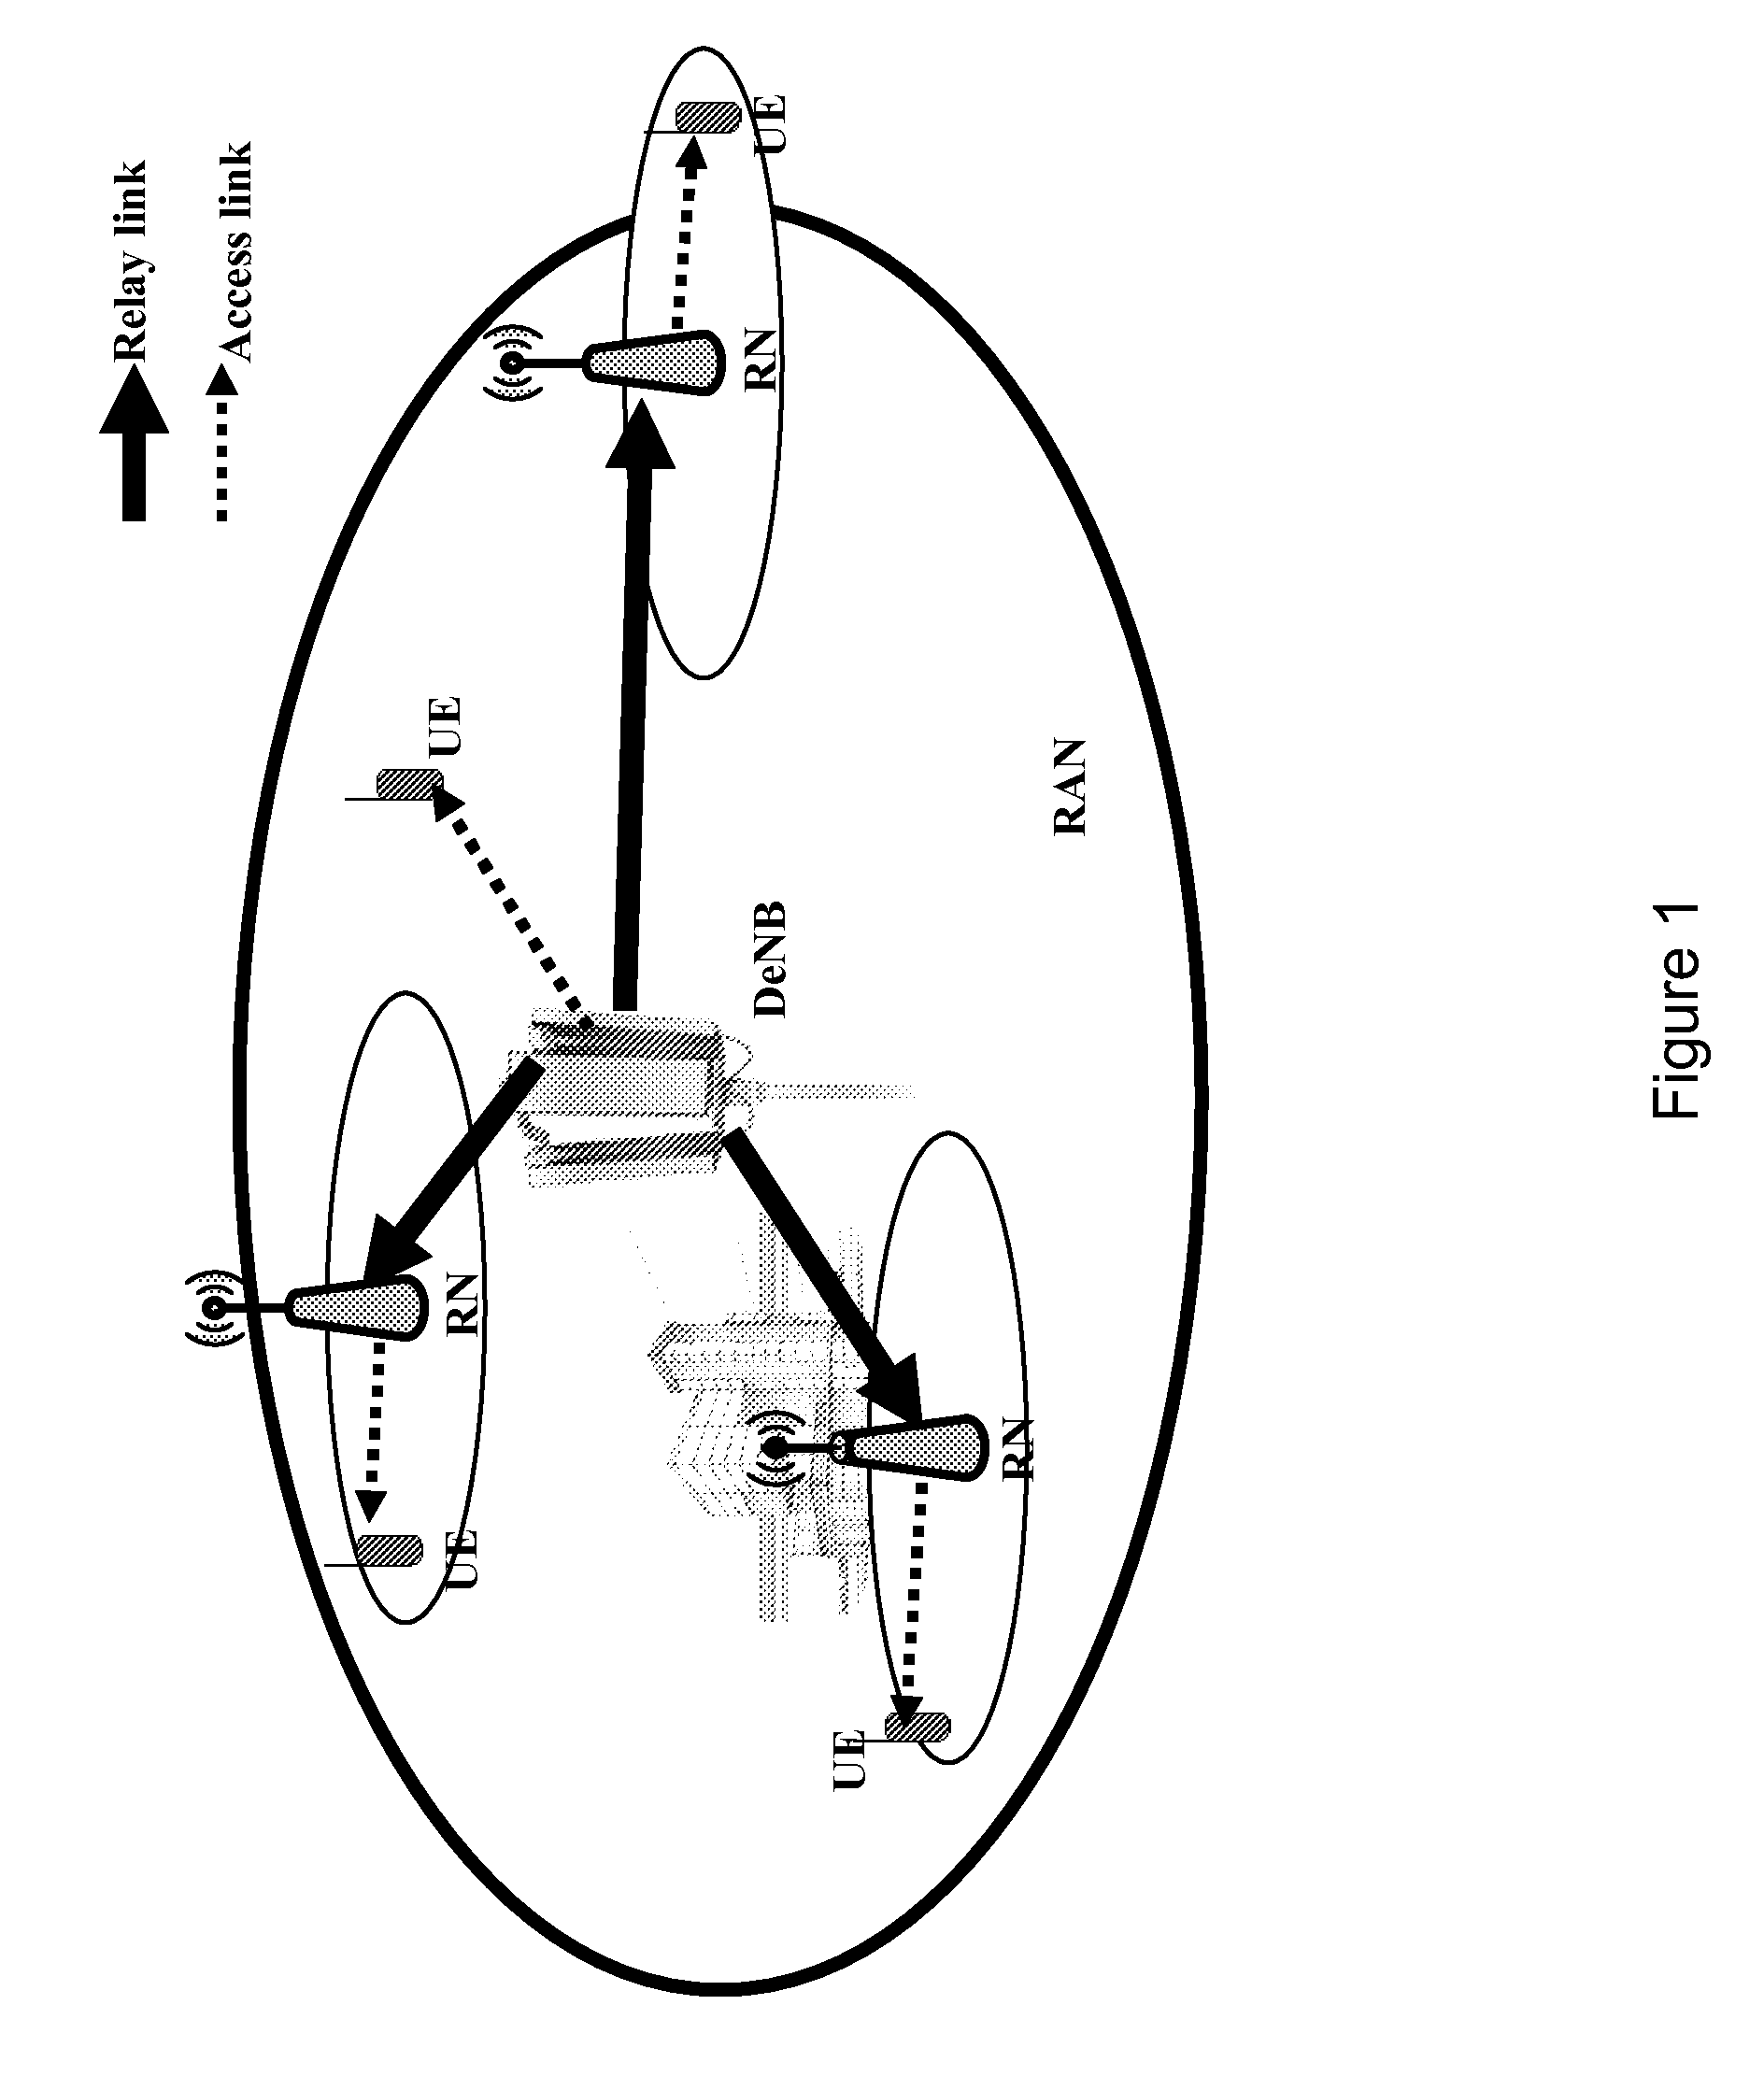 Handover control for networks with several types of backhaul connections